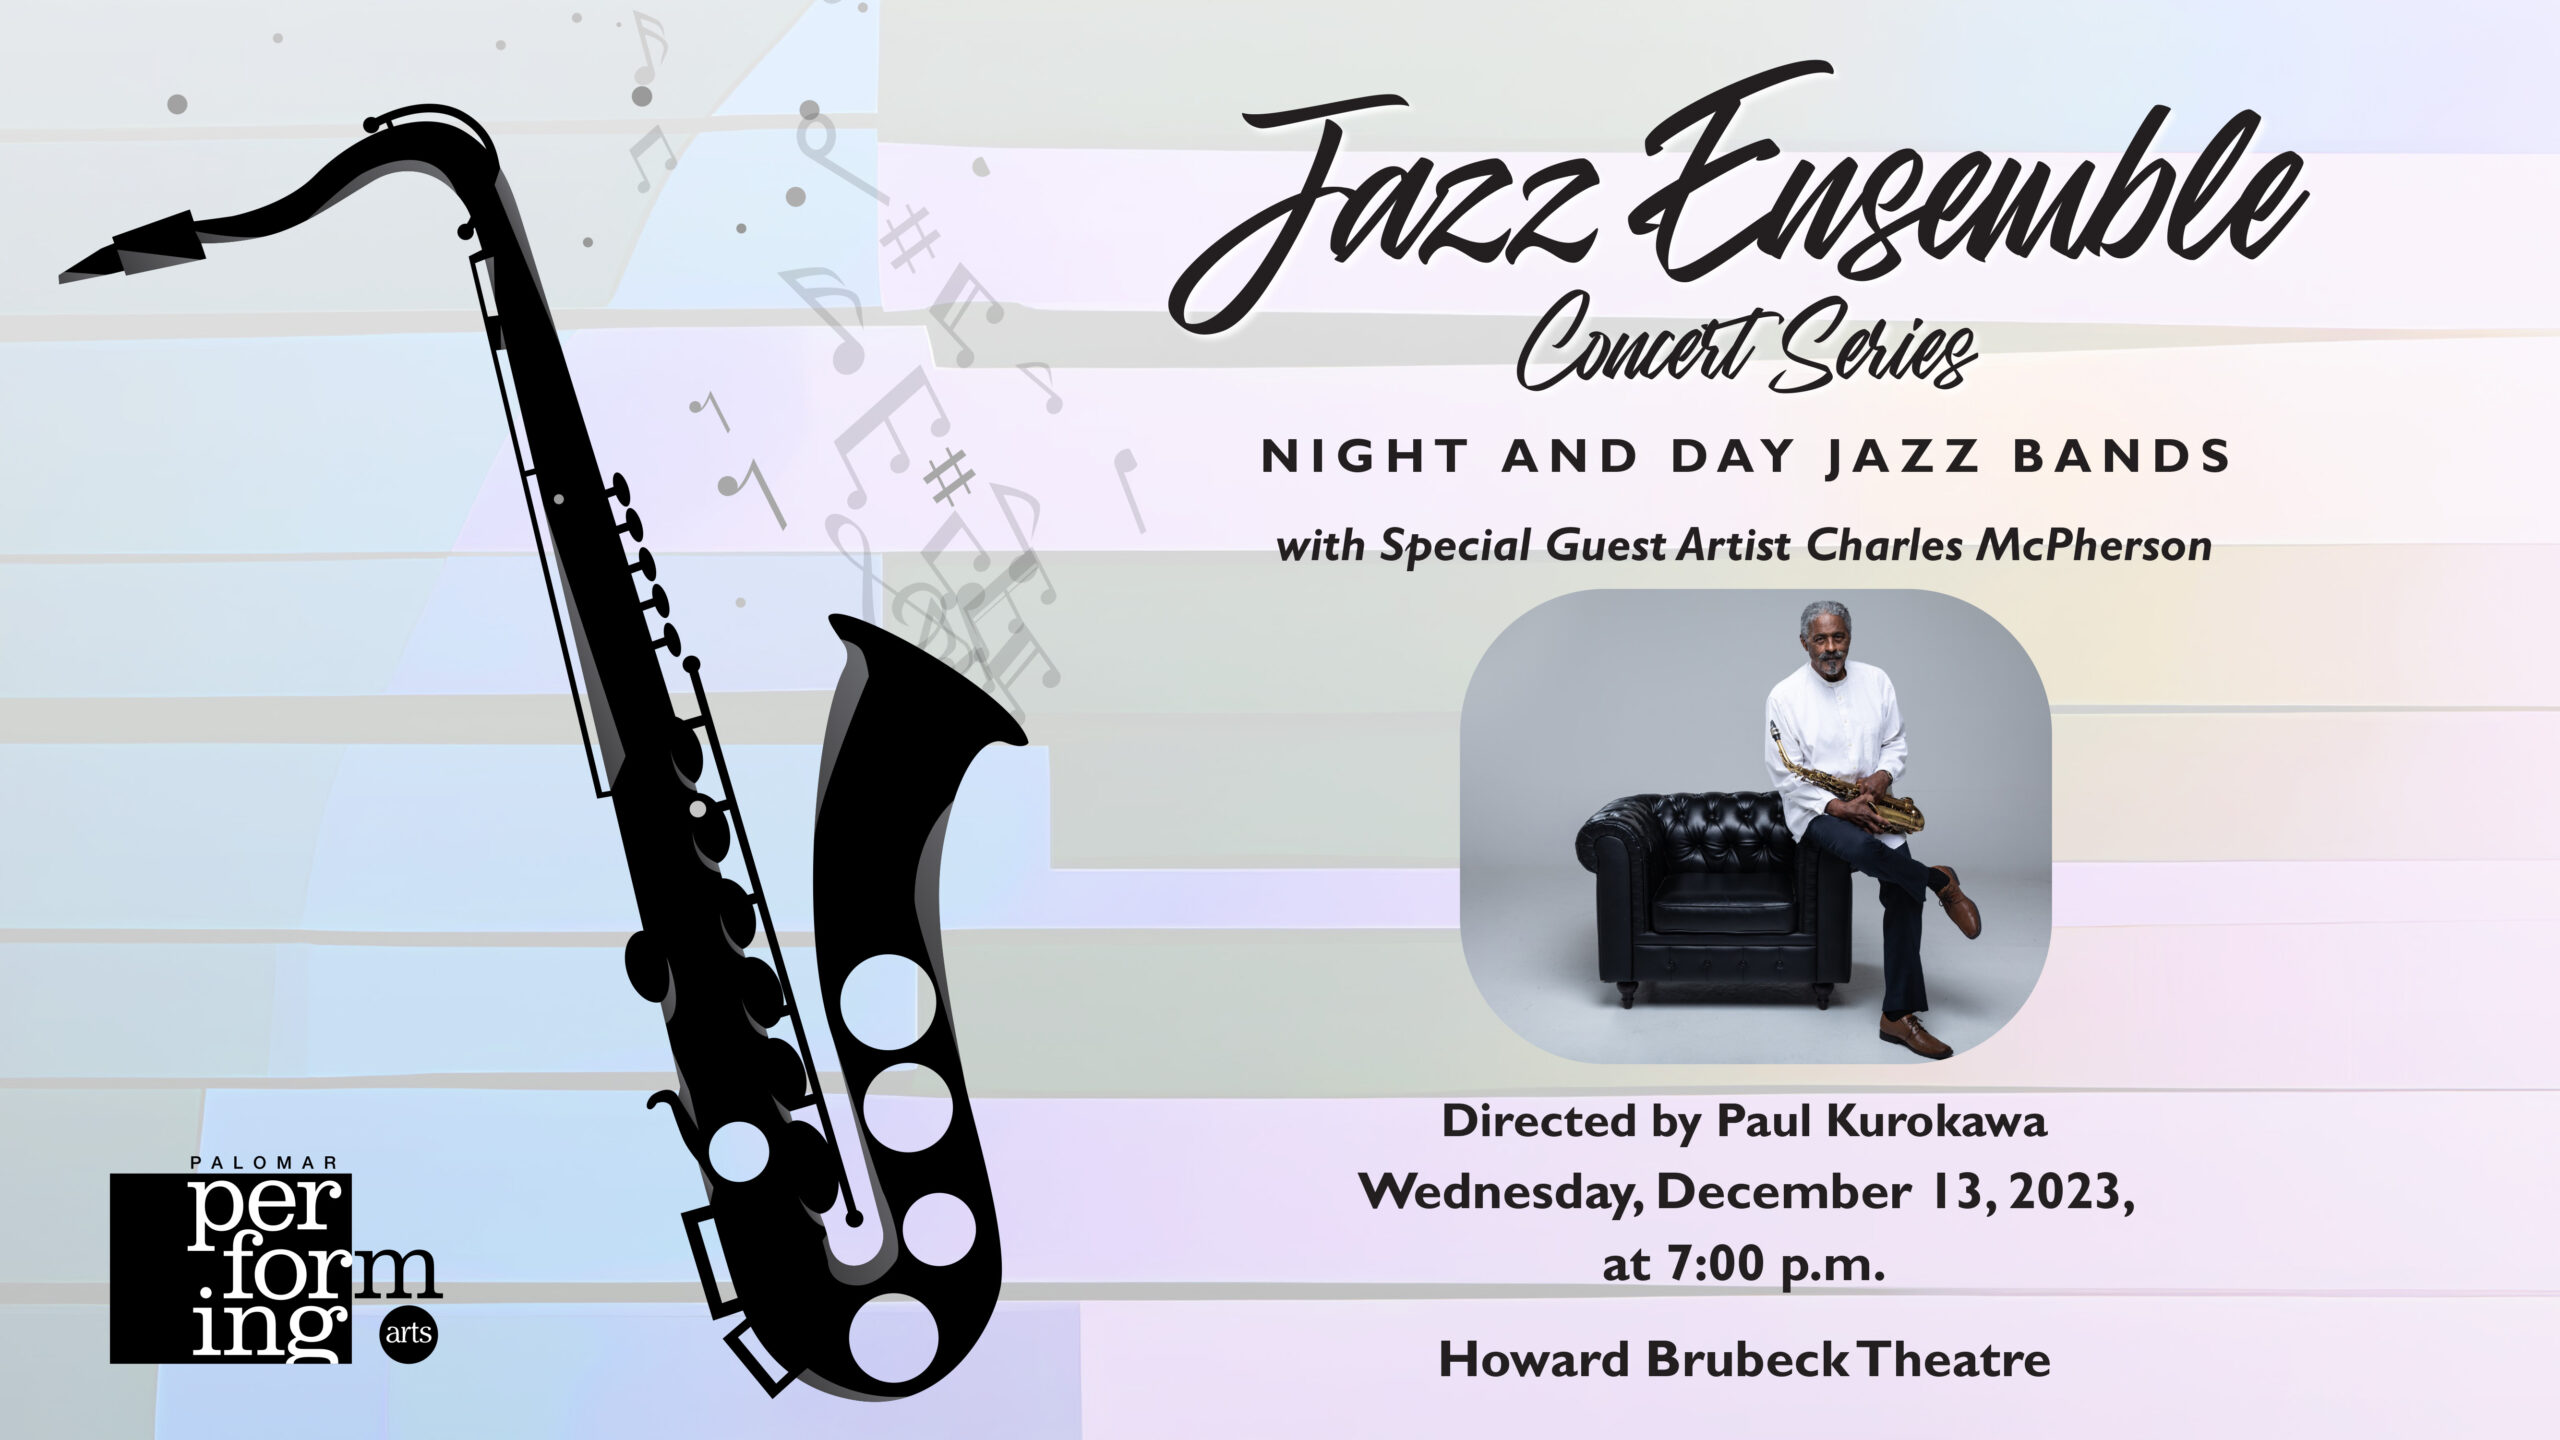 JAZZ ENSEMBLE CONCERT SERIES – Night and Day Jazz Bands – With Special Guest Charles McPherson